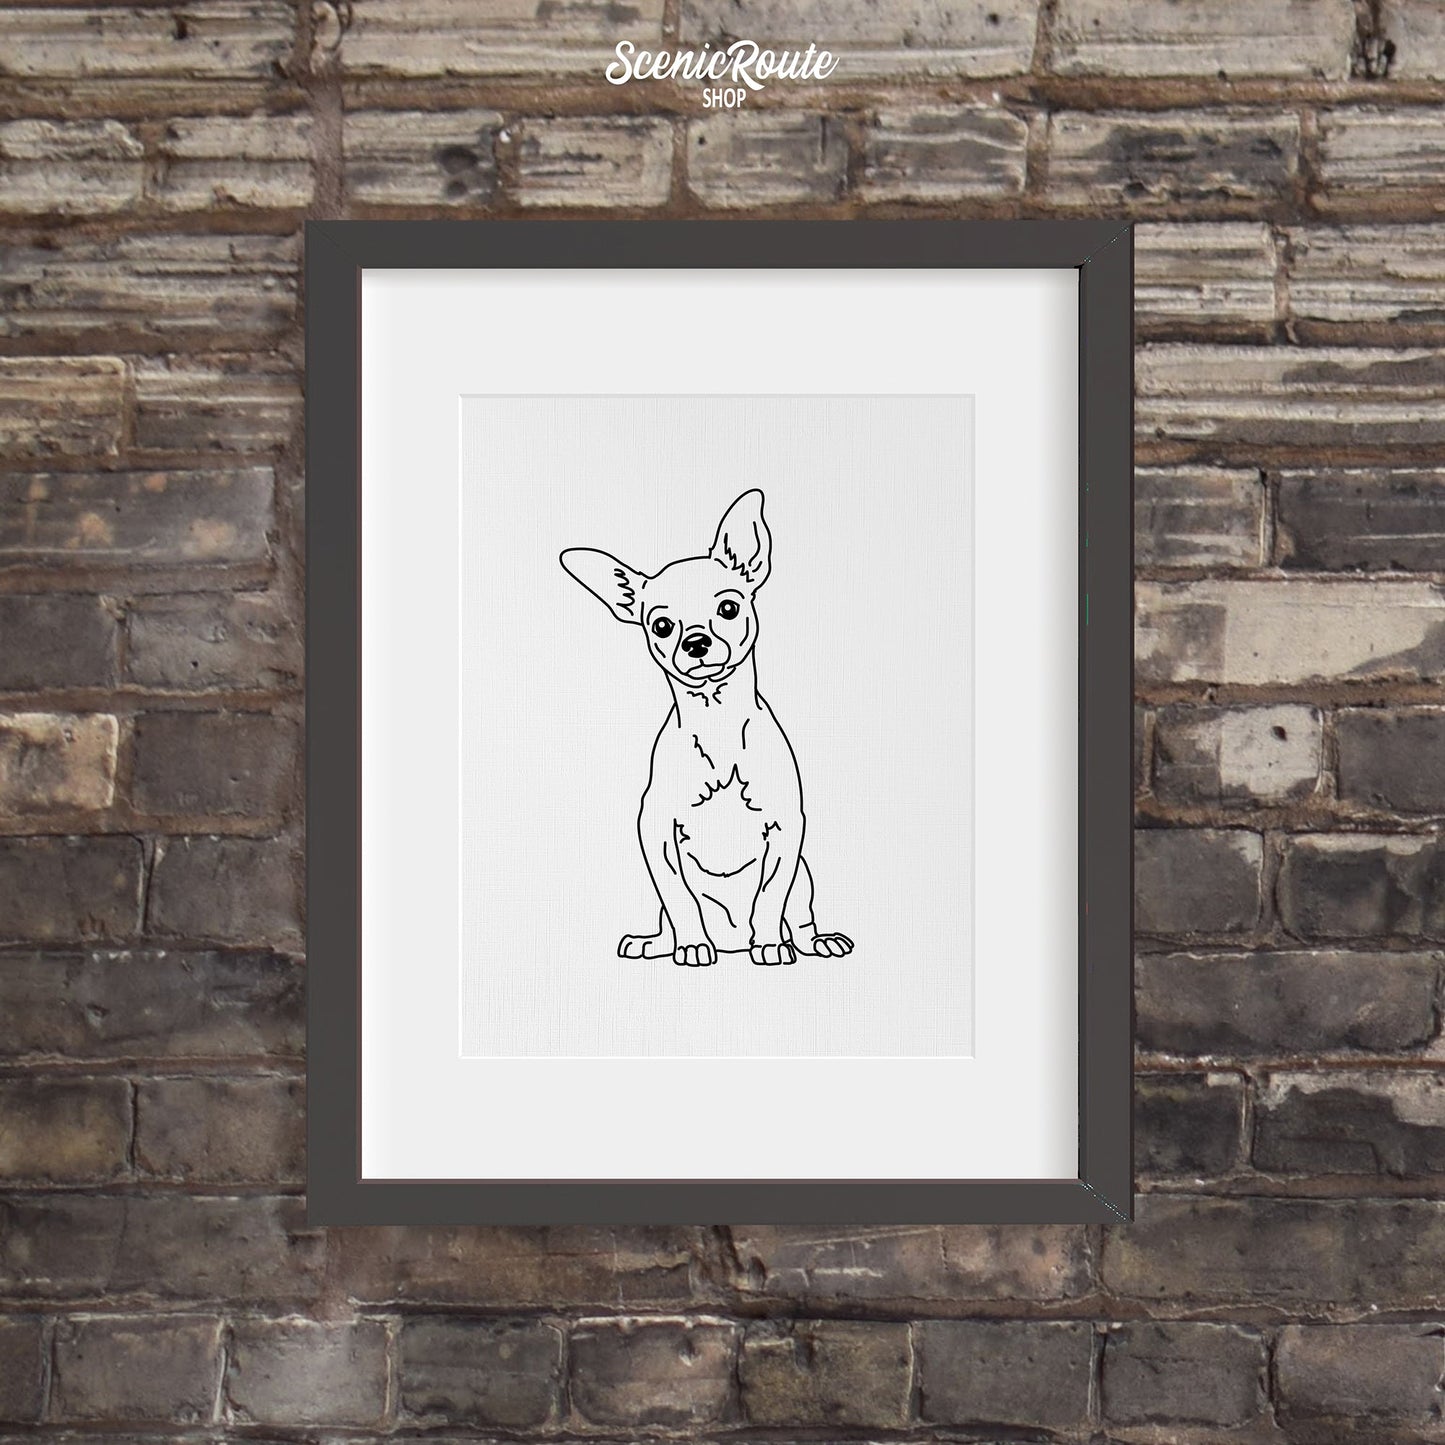 A framed line art drawing of a Chihuahua dog on a dark brick wall